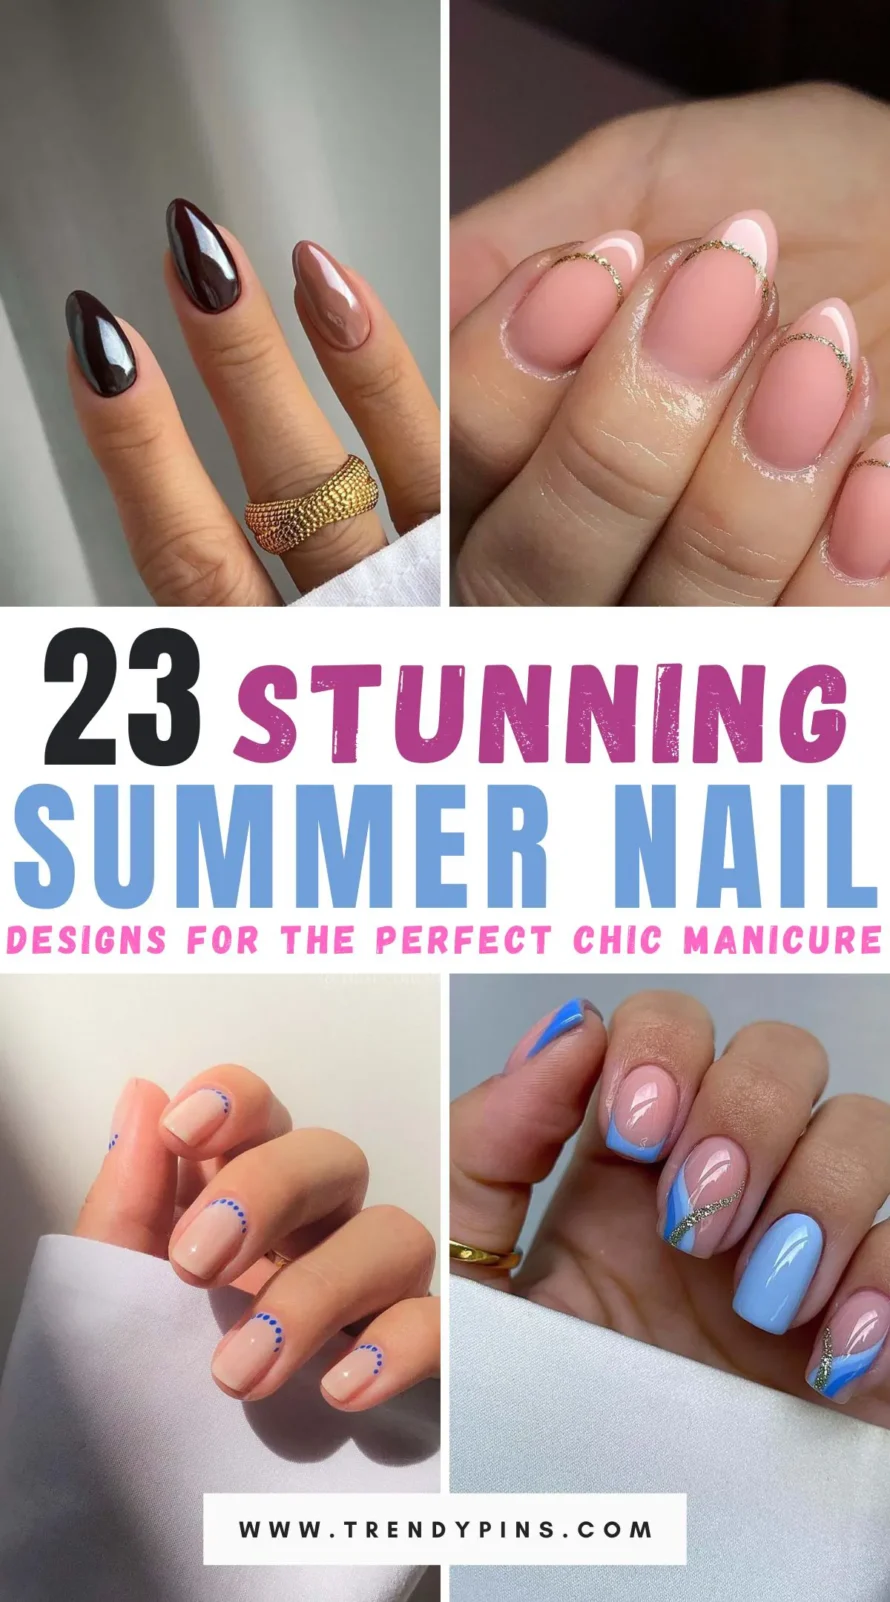 Achieve the perfect chic manicure with our 23 beautiful summer nail designs. From vibrant tropical patterns to elegant pastel hues, discover a variety of styles that capture the essence of the season. Explore creative nail art ideas that will make your summer look pop and keep your nails looking fresh and stylish all season long.